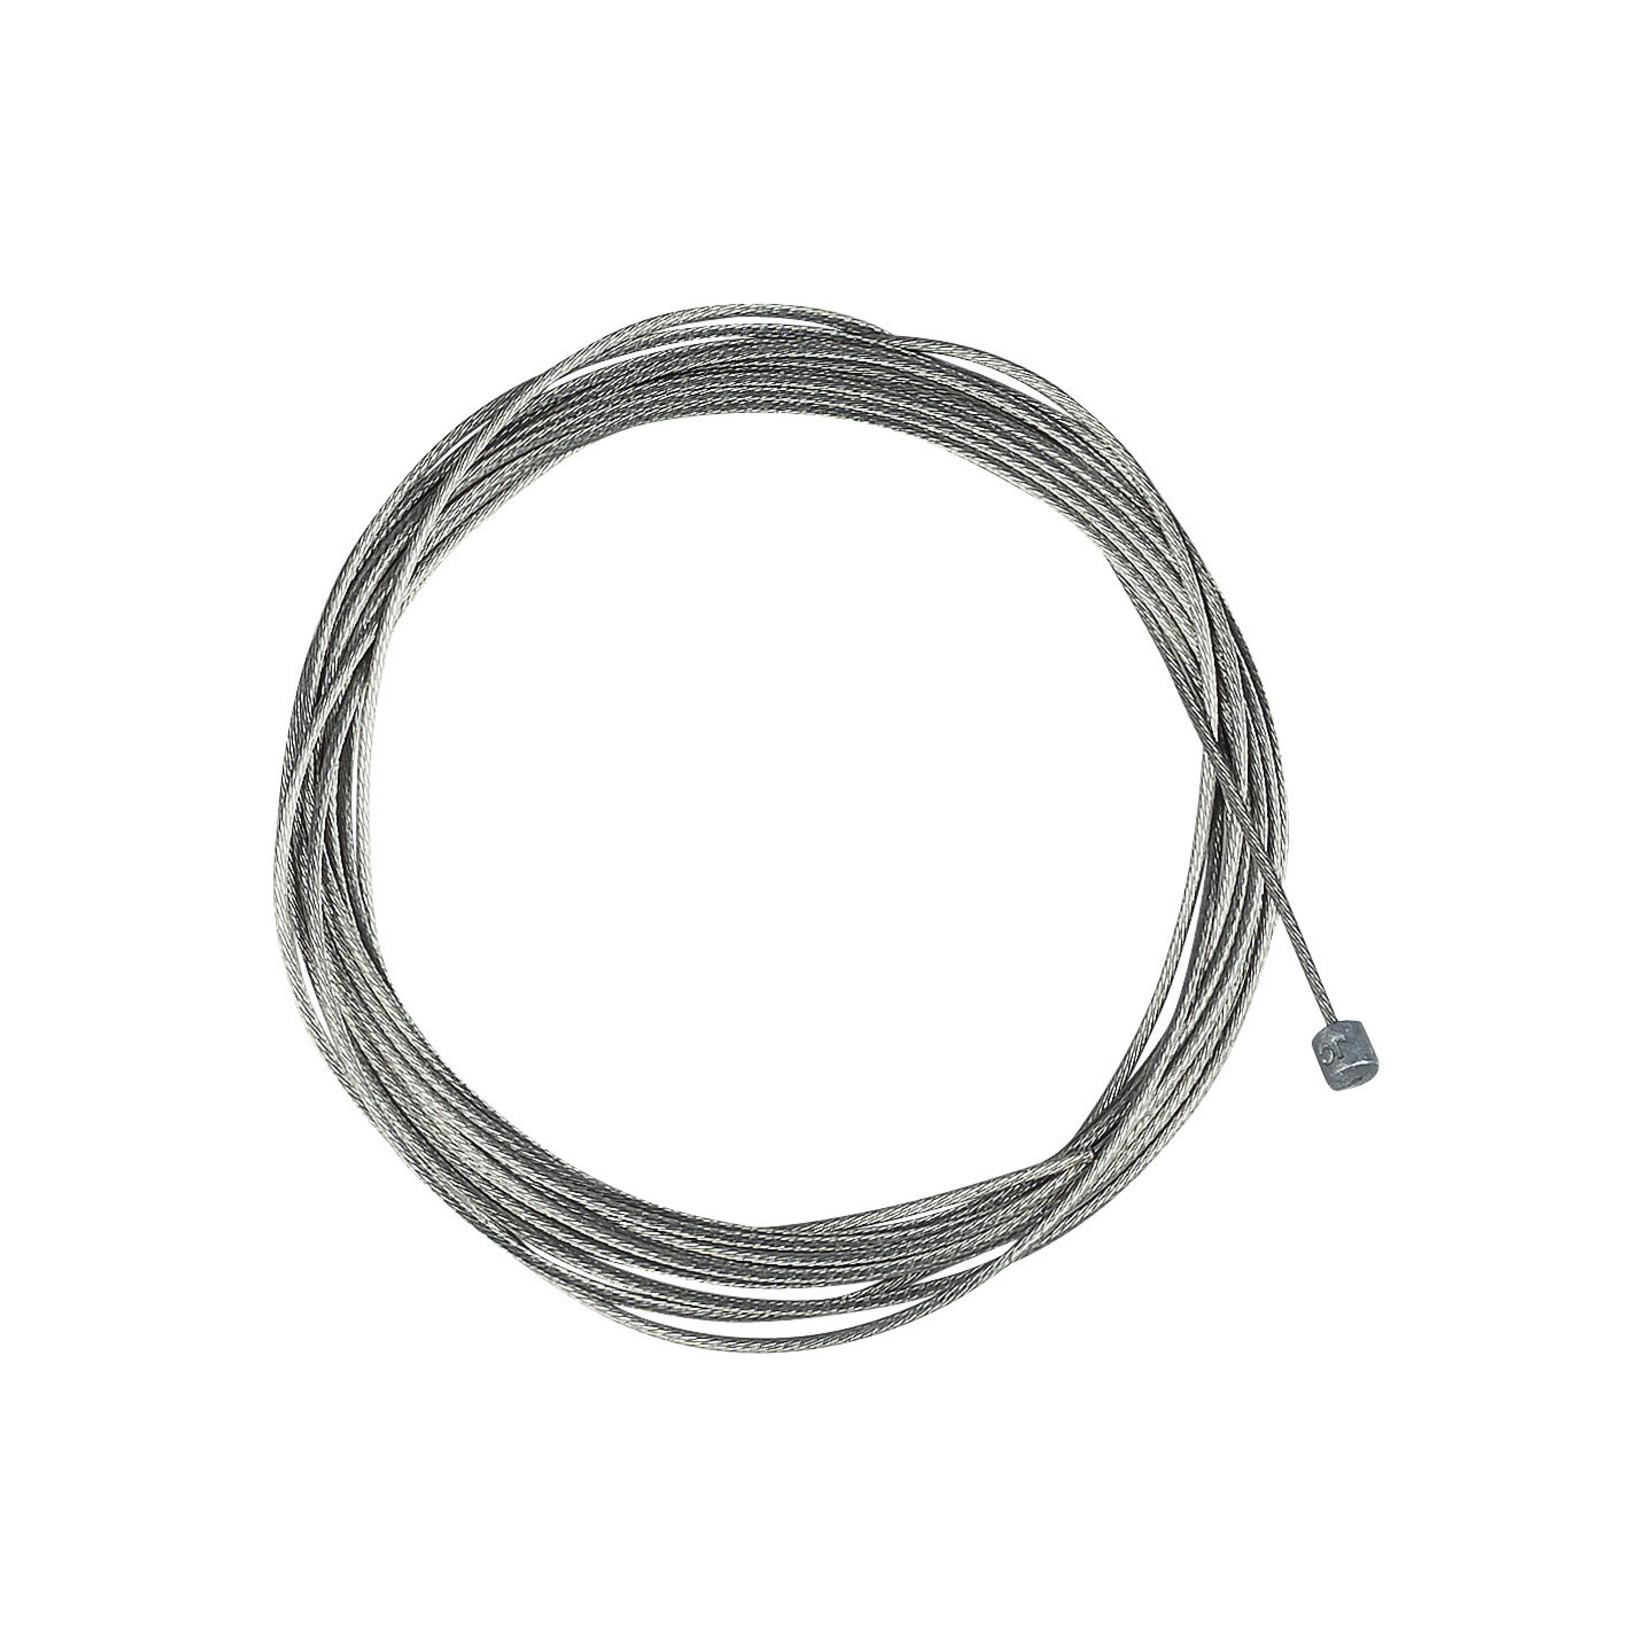 JAGWIRE Jagwire Slick Stainless Shift Cable, Shimano/Sram, 1.1mm x 2300mm